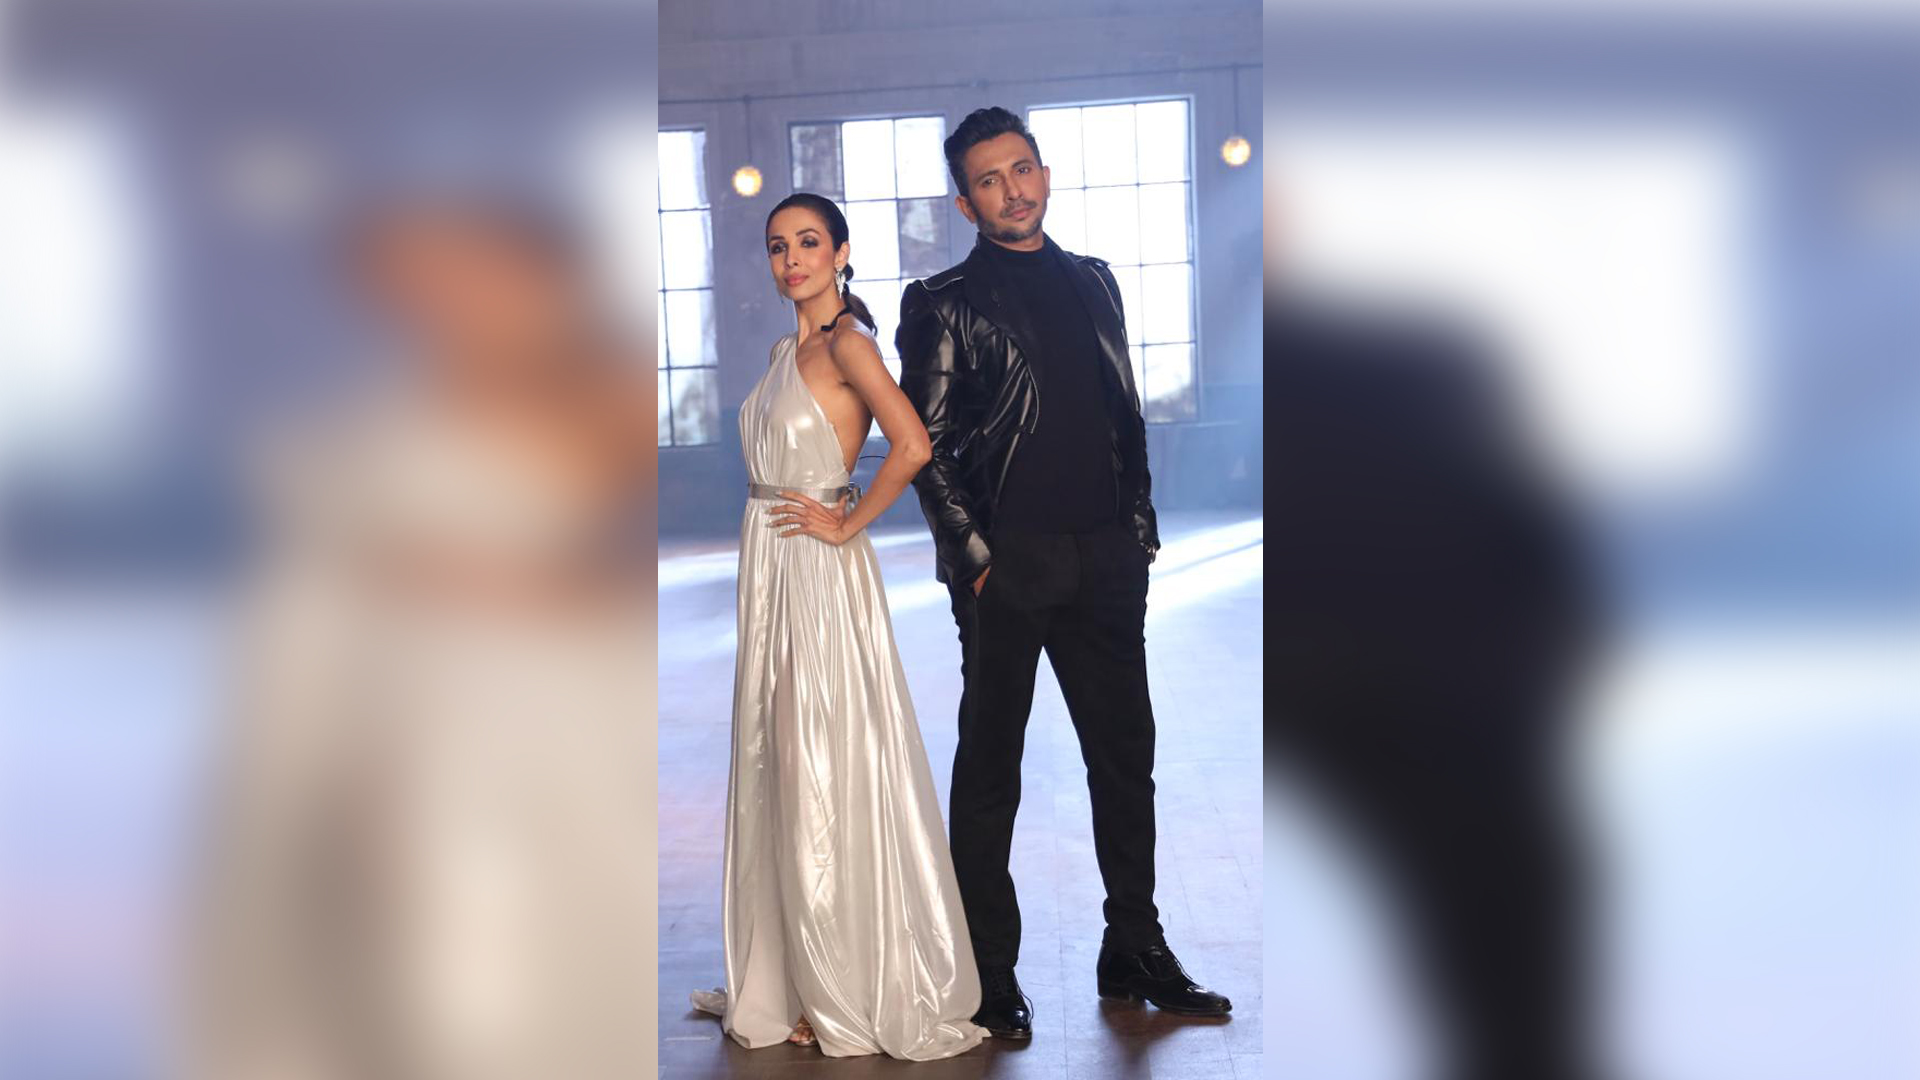 Malaika Arora was Terence’s student 20 years ago Or After 20 years, Terence and Malaika come together to judge India’s Best Dancer